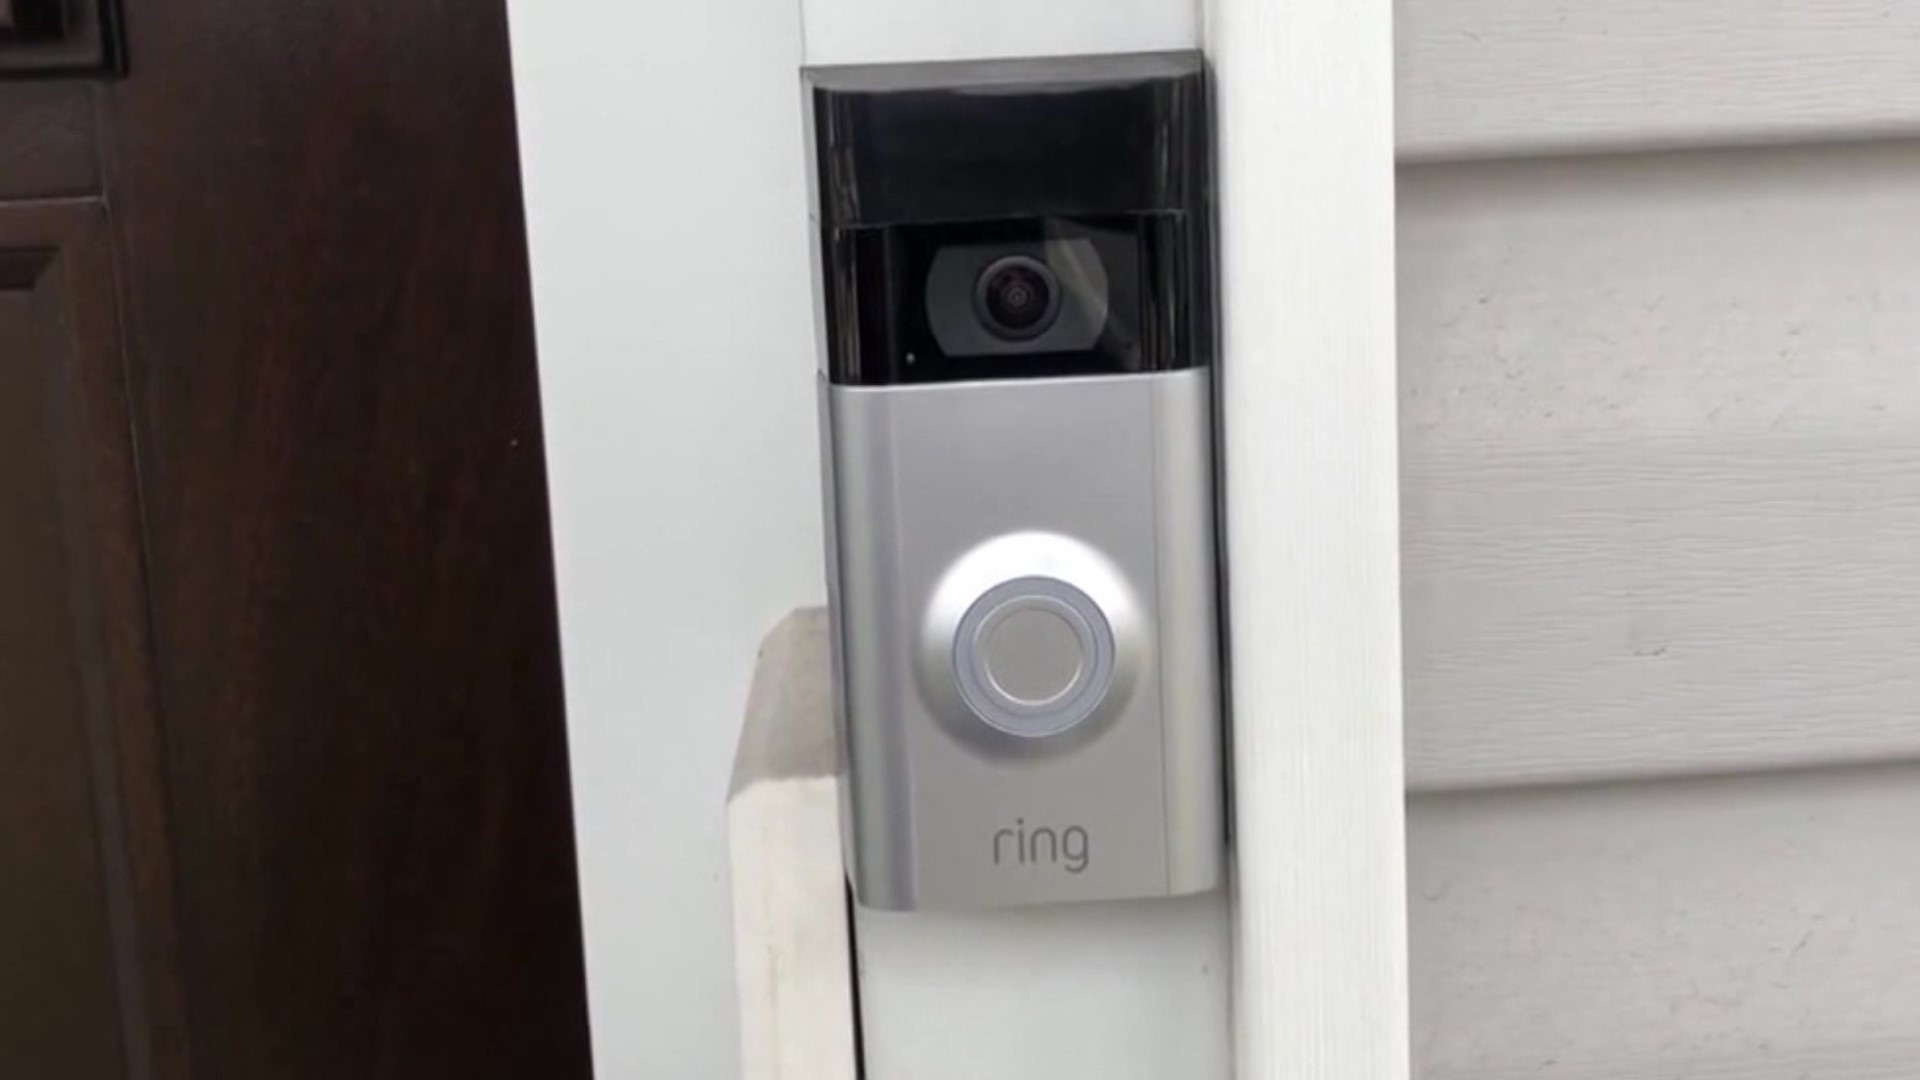 The popular brand 'Ring' is discontinuing a feature that allows police to ask for video from users without warrants.